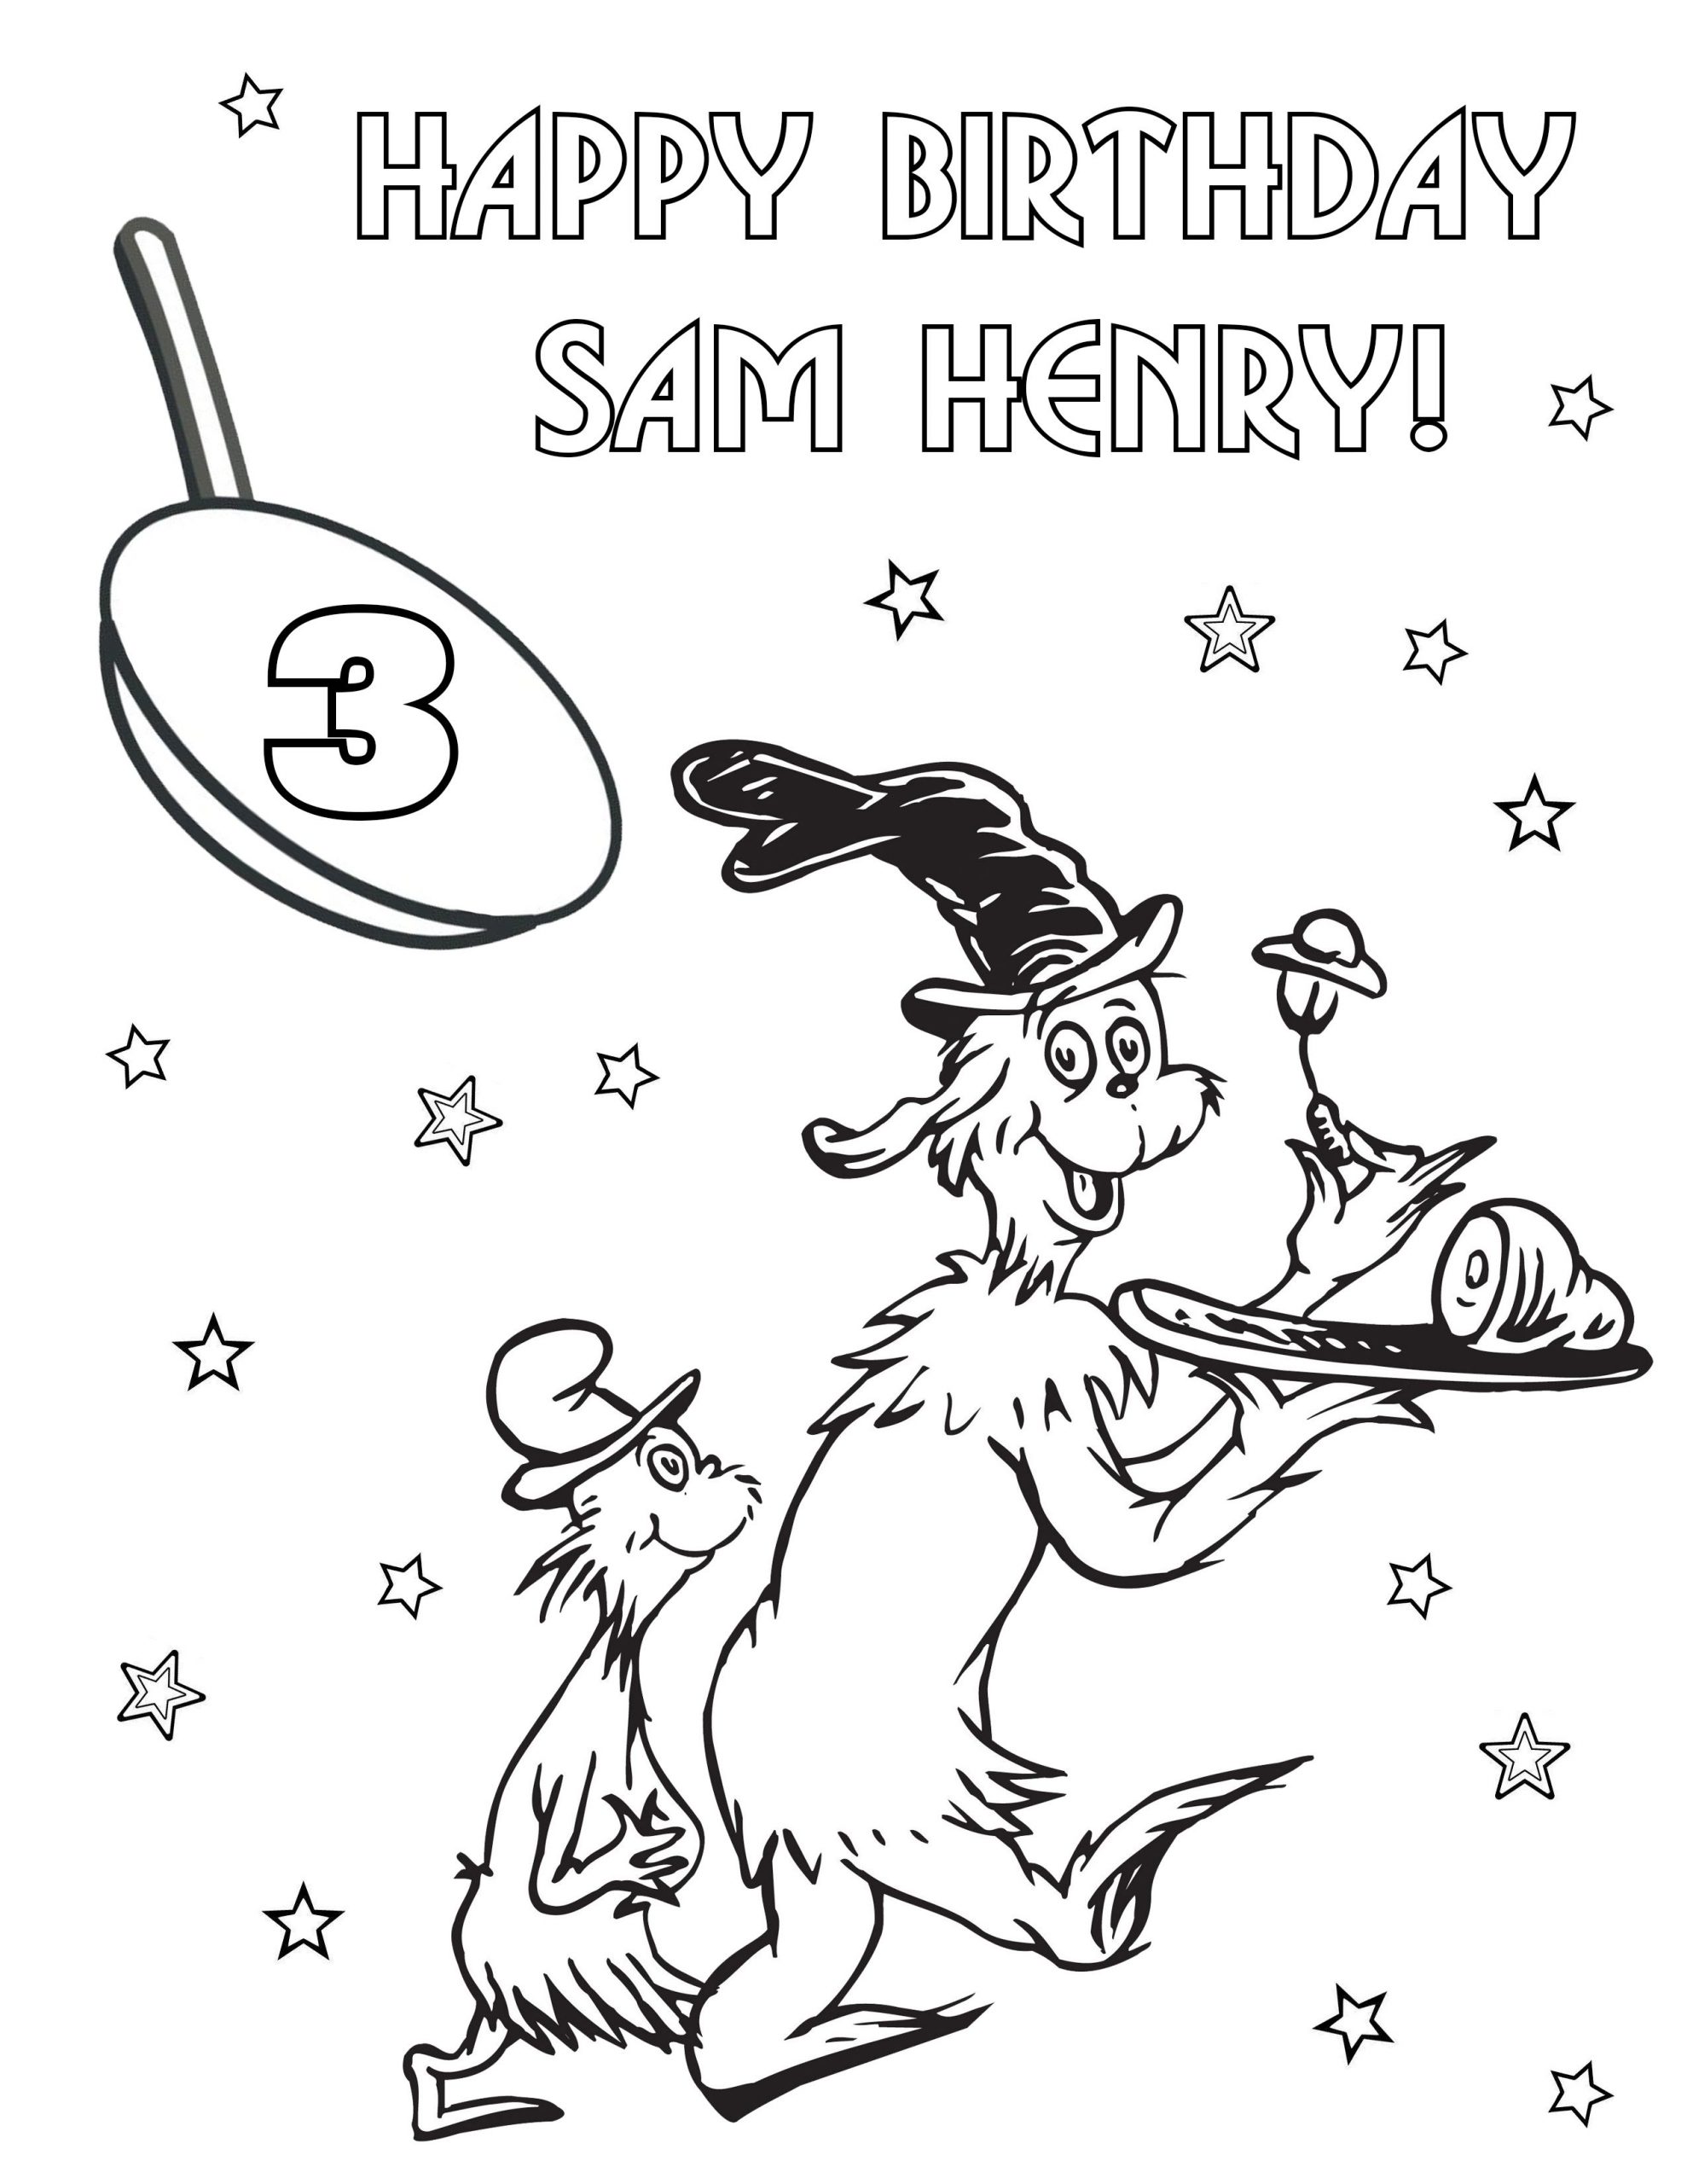 Dr Seuss Coloring Pages Green Eggs and Ham Birthday.